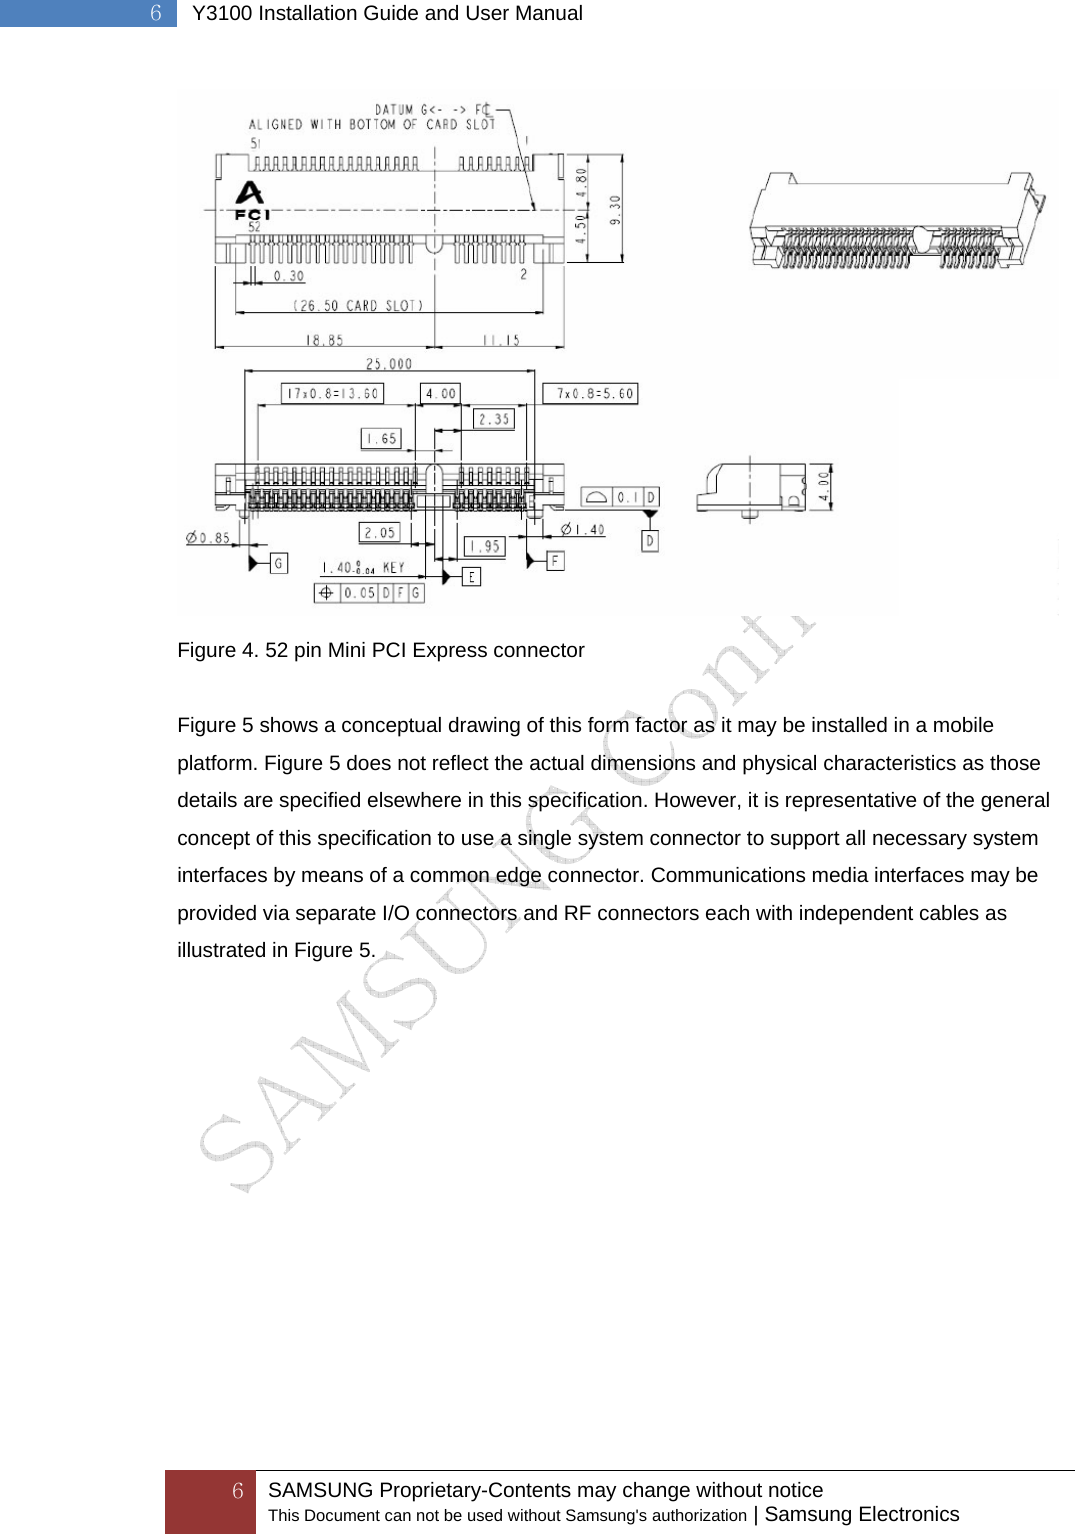  6 SAMSUNG Proprietary-Contents may change without notice This Document can not be used without Samsung&apos;s authorization | Samsung Electronics  6  Y3100 Installation Guide and User Manual  Figure 4. 52 pin Mini PCI Express connector  Figure 5 shows a conceptual drawing of this form factor as it may be installed in a mobile platform. Figure 5 does not reflect the actual dimensions and physical characteristics as those details are specified elsewhere in this specification. However, it is representative of the general concept of this specification to use a single system connector to support all necessary system interfaces by means of a common edge connector. Communications media interfaces may be provided via separate I/O connectors and RF connectors each with independent cables as illustrated in Figure 5. 